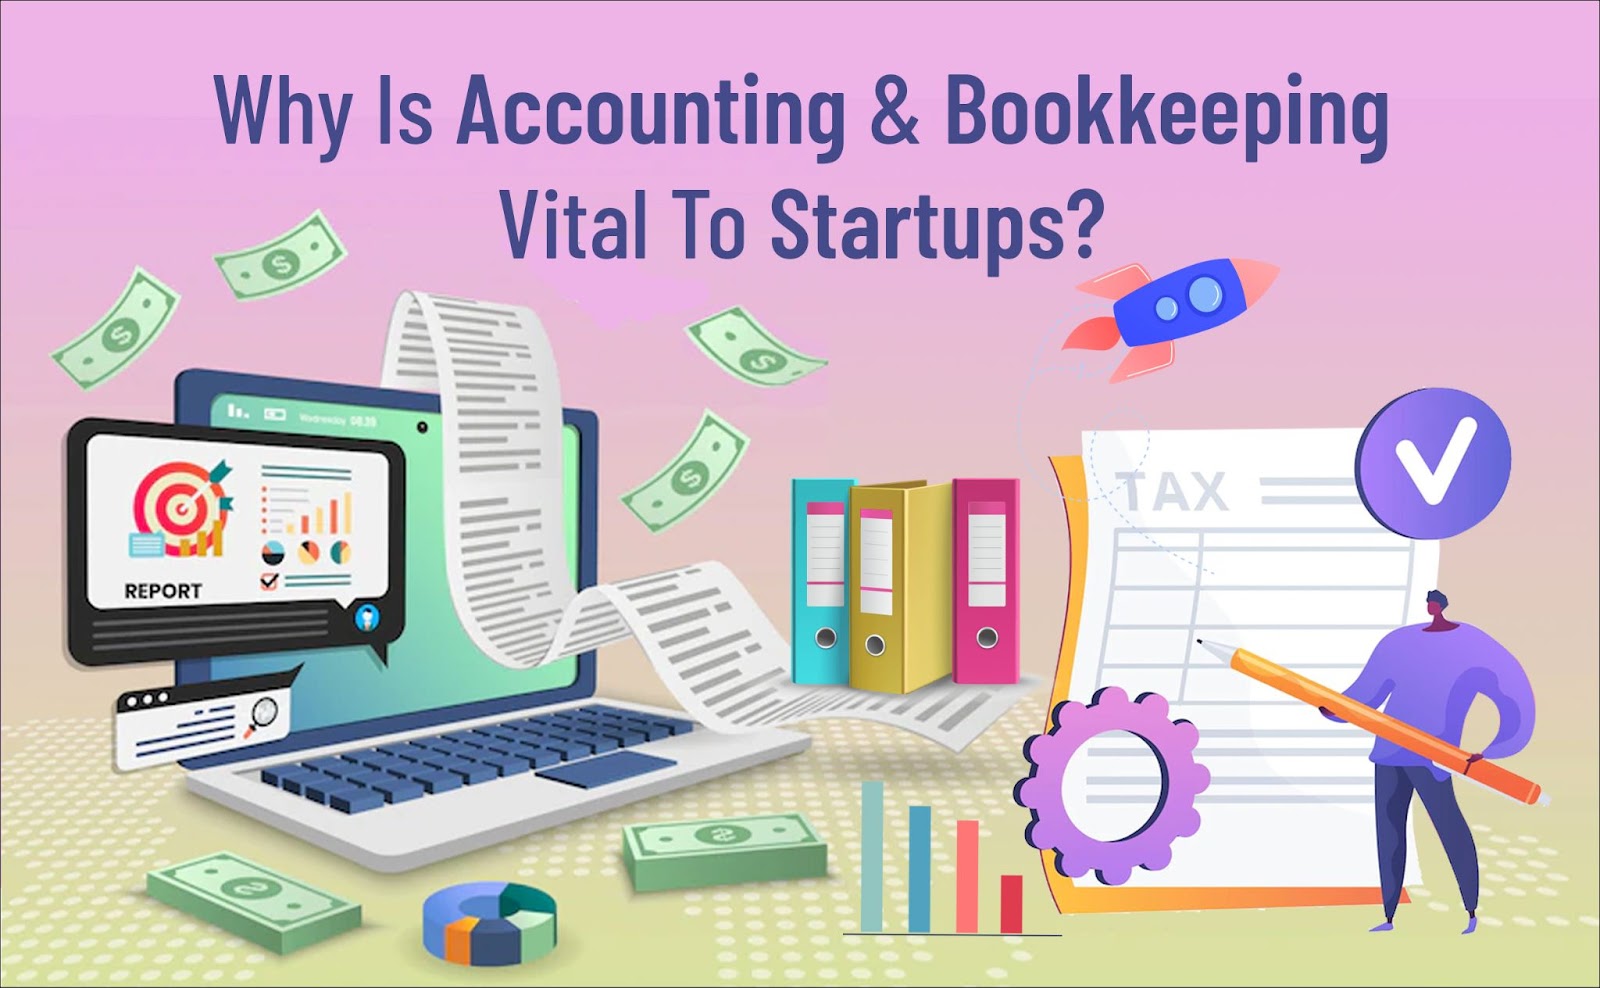 Why Is Accounting And Bookkeeping Vital To Startups?